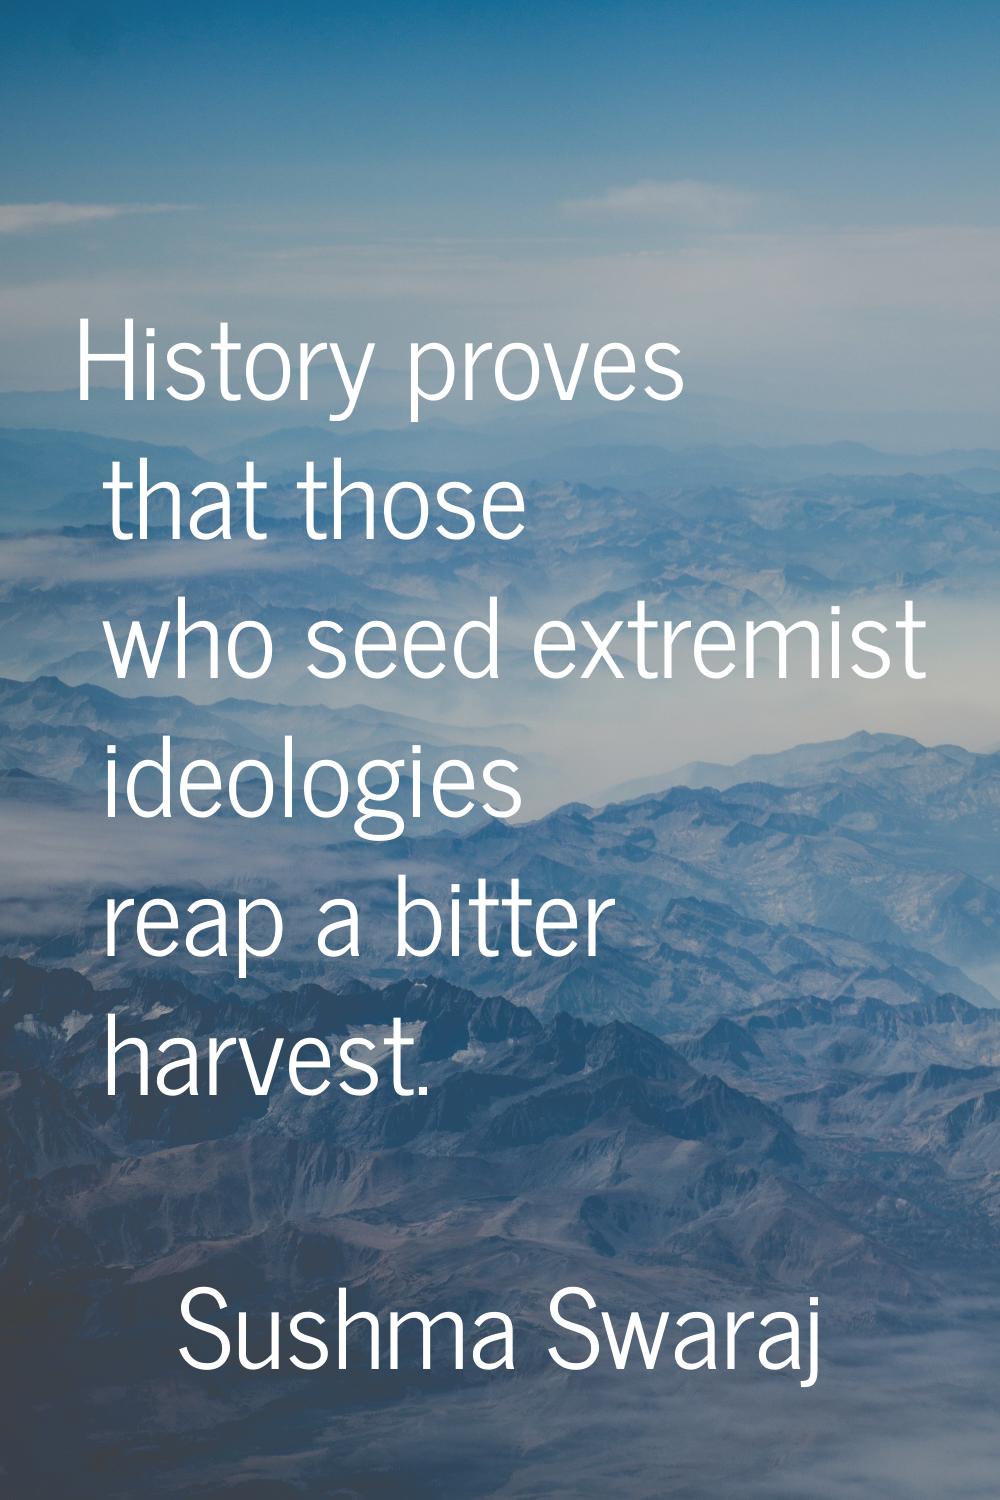 History proves that those who seed extremist ideologies reap a bitter harvest.